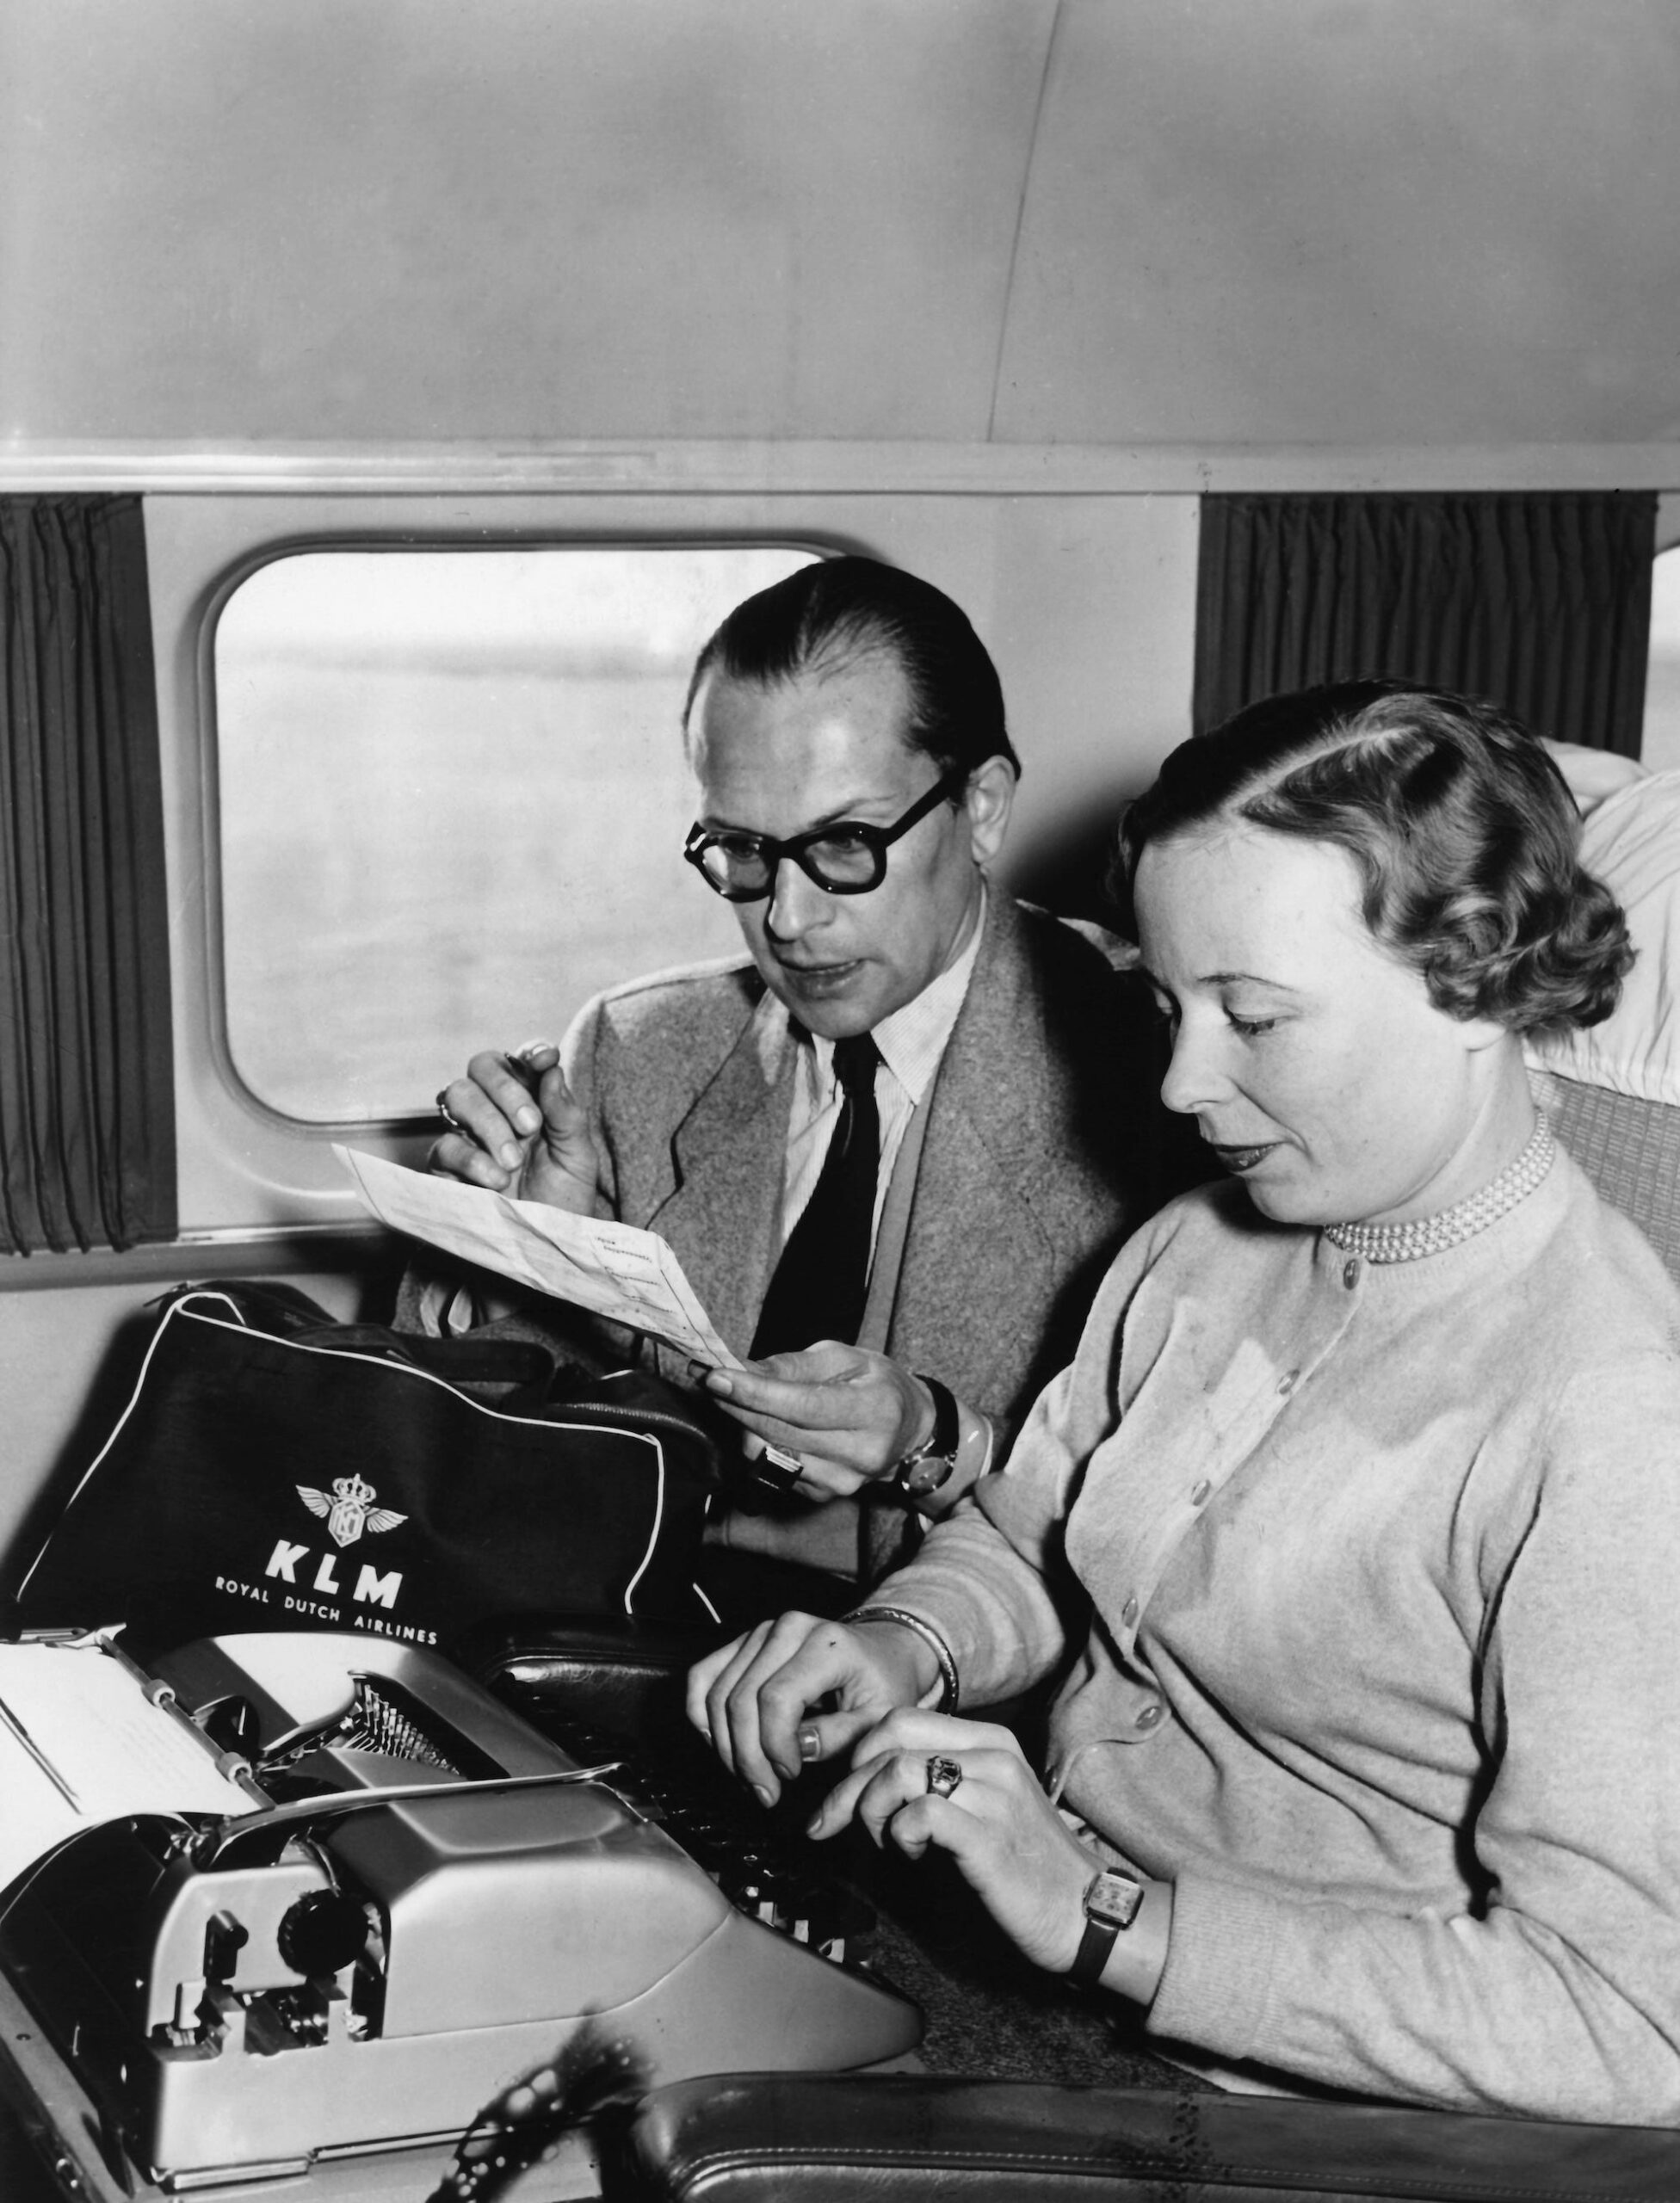 A secretary typing on a typewriter on a plane in 1955